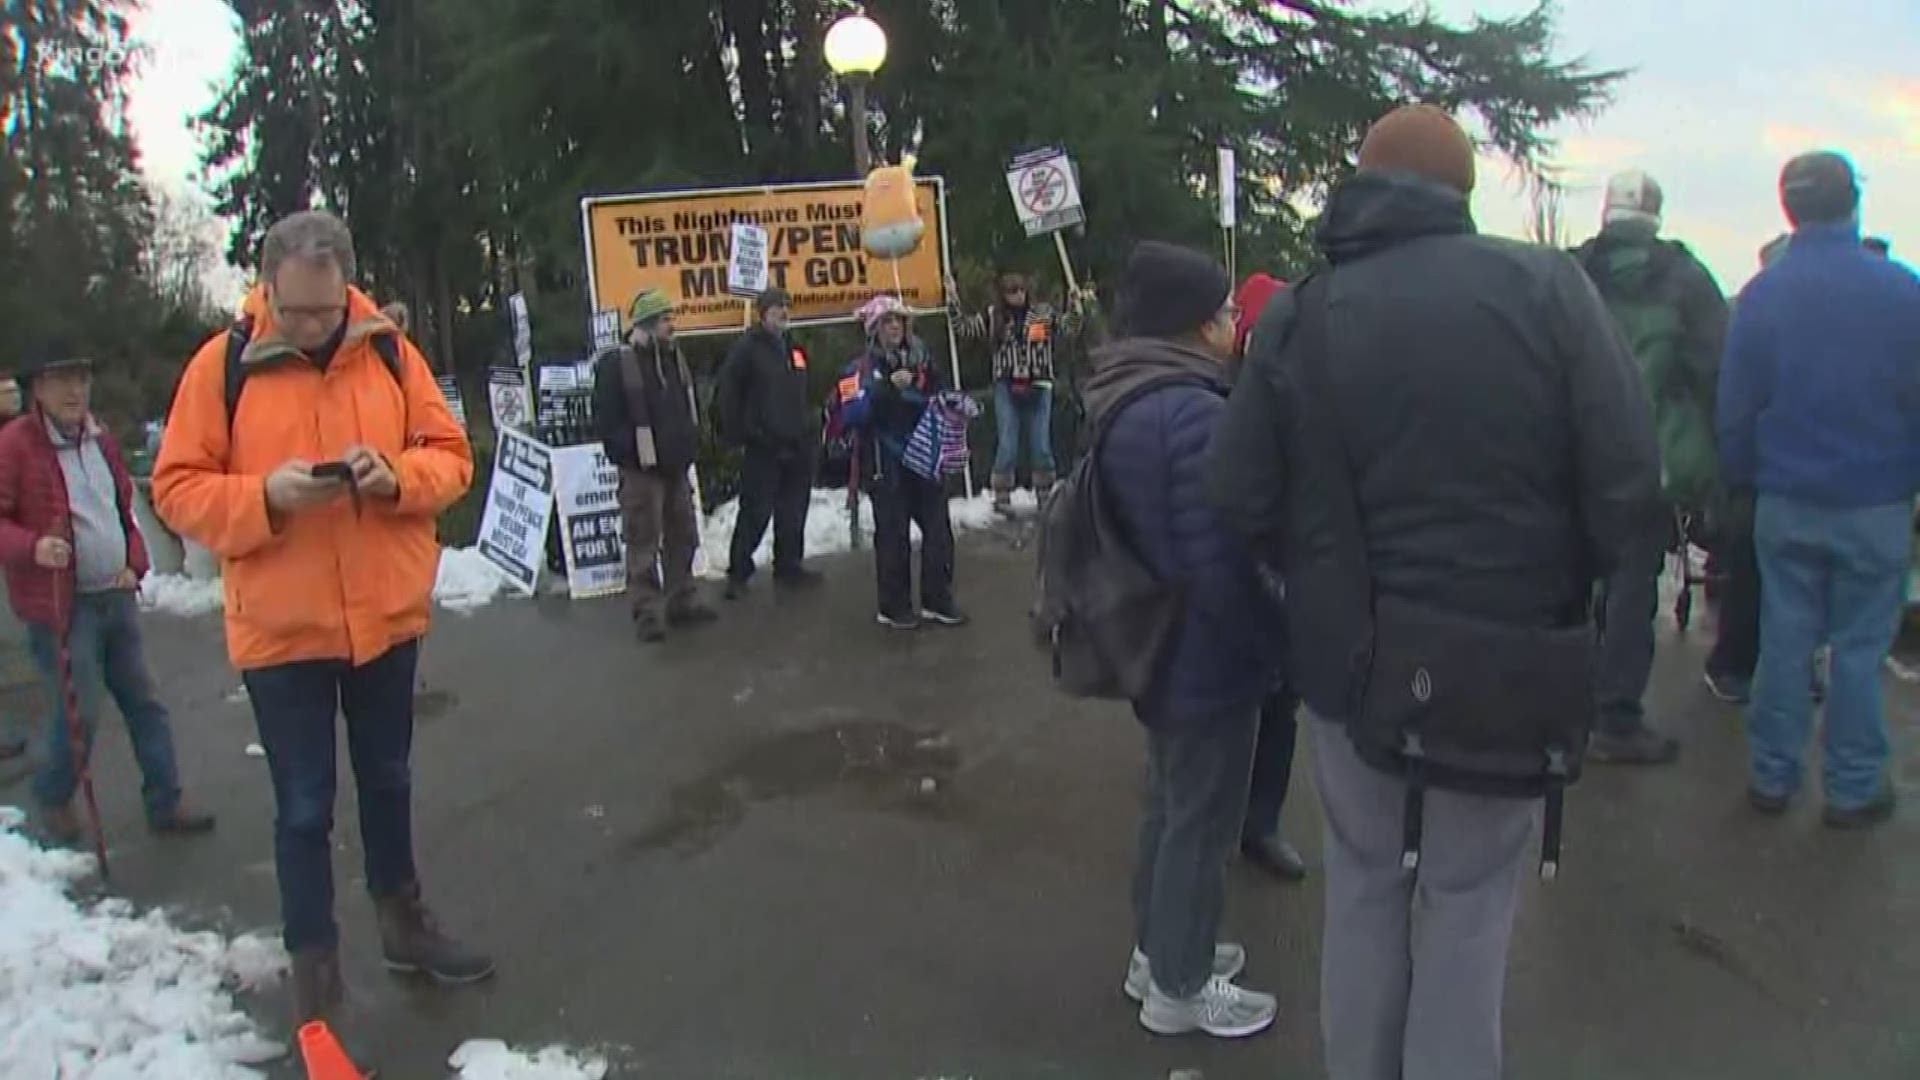 A crowd gathered in Seattle's Volunteer Park for an evening protest following the National Emergency declared by President Trump. KING 5's Amy Moreno reports.